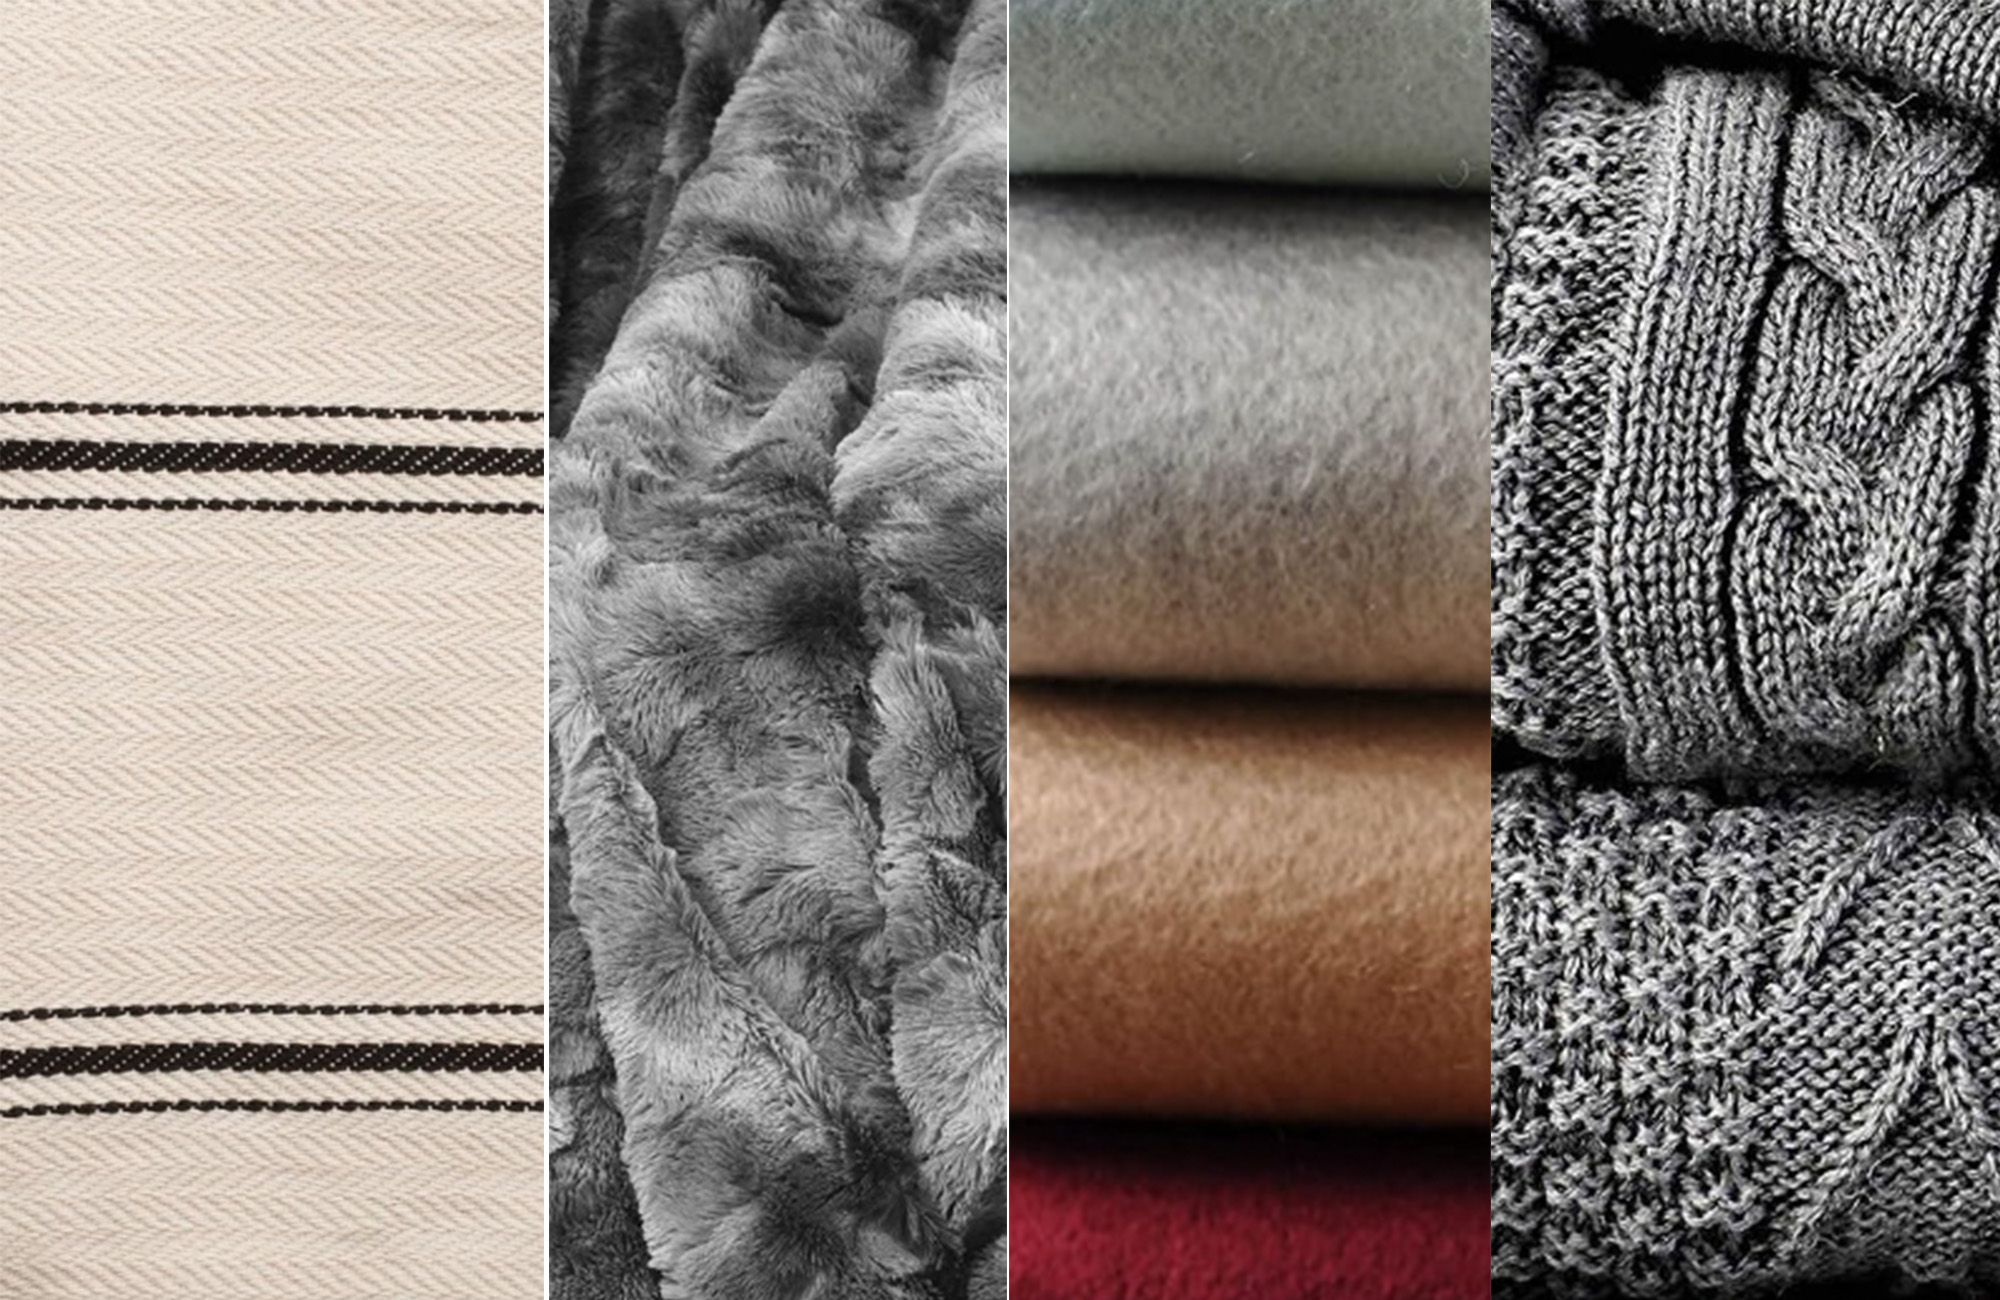 Designer Throws To Stay Warm And Cozy With This Winter 